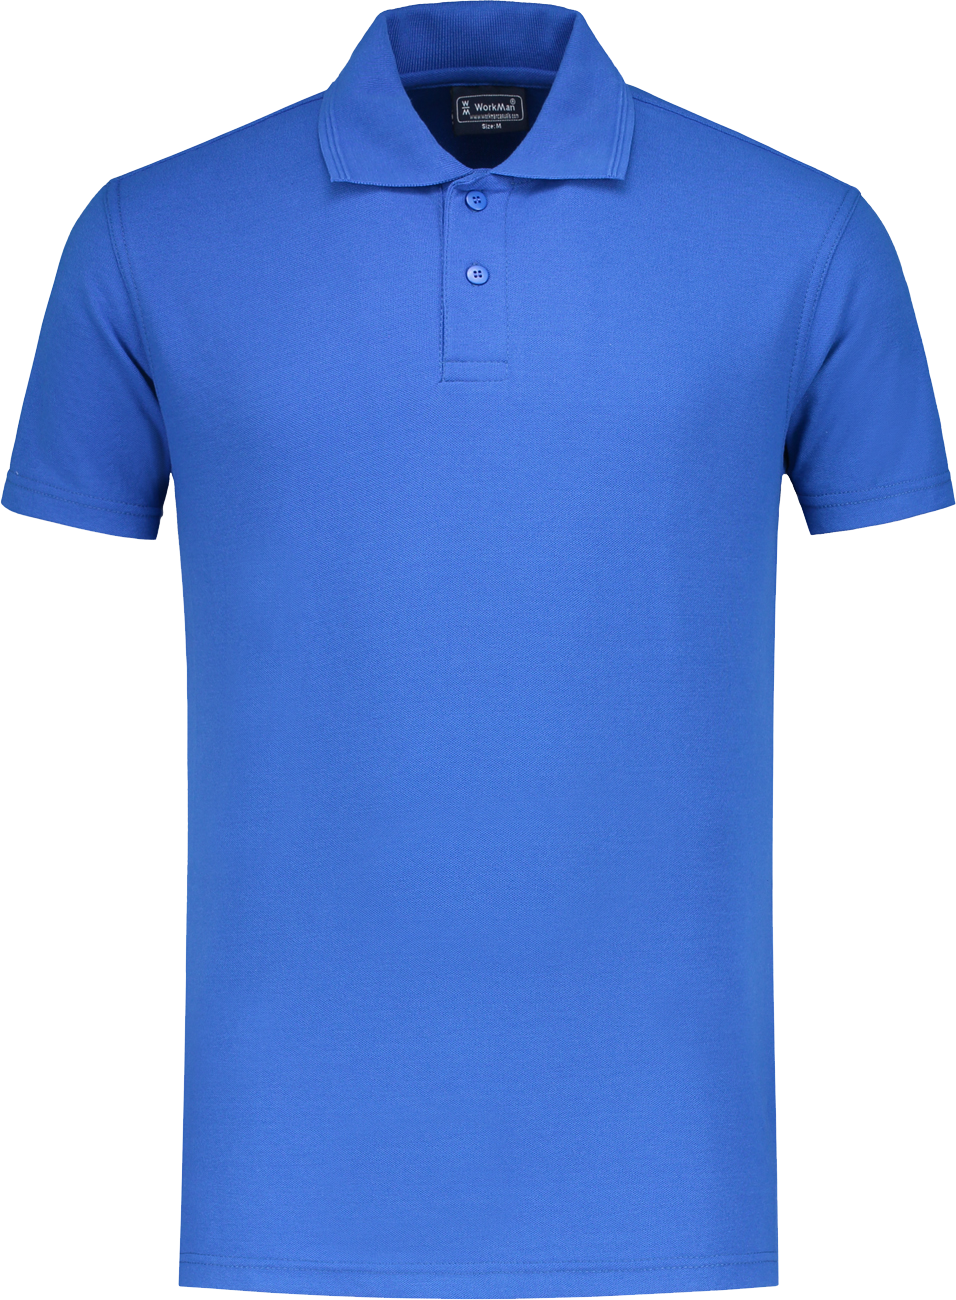 10.6.8104.00 8104 Poloshirt Outfitters Royal Blue XS